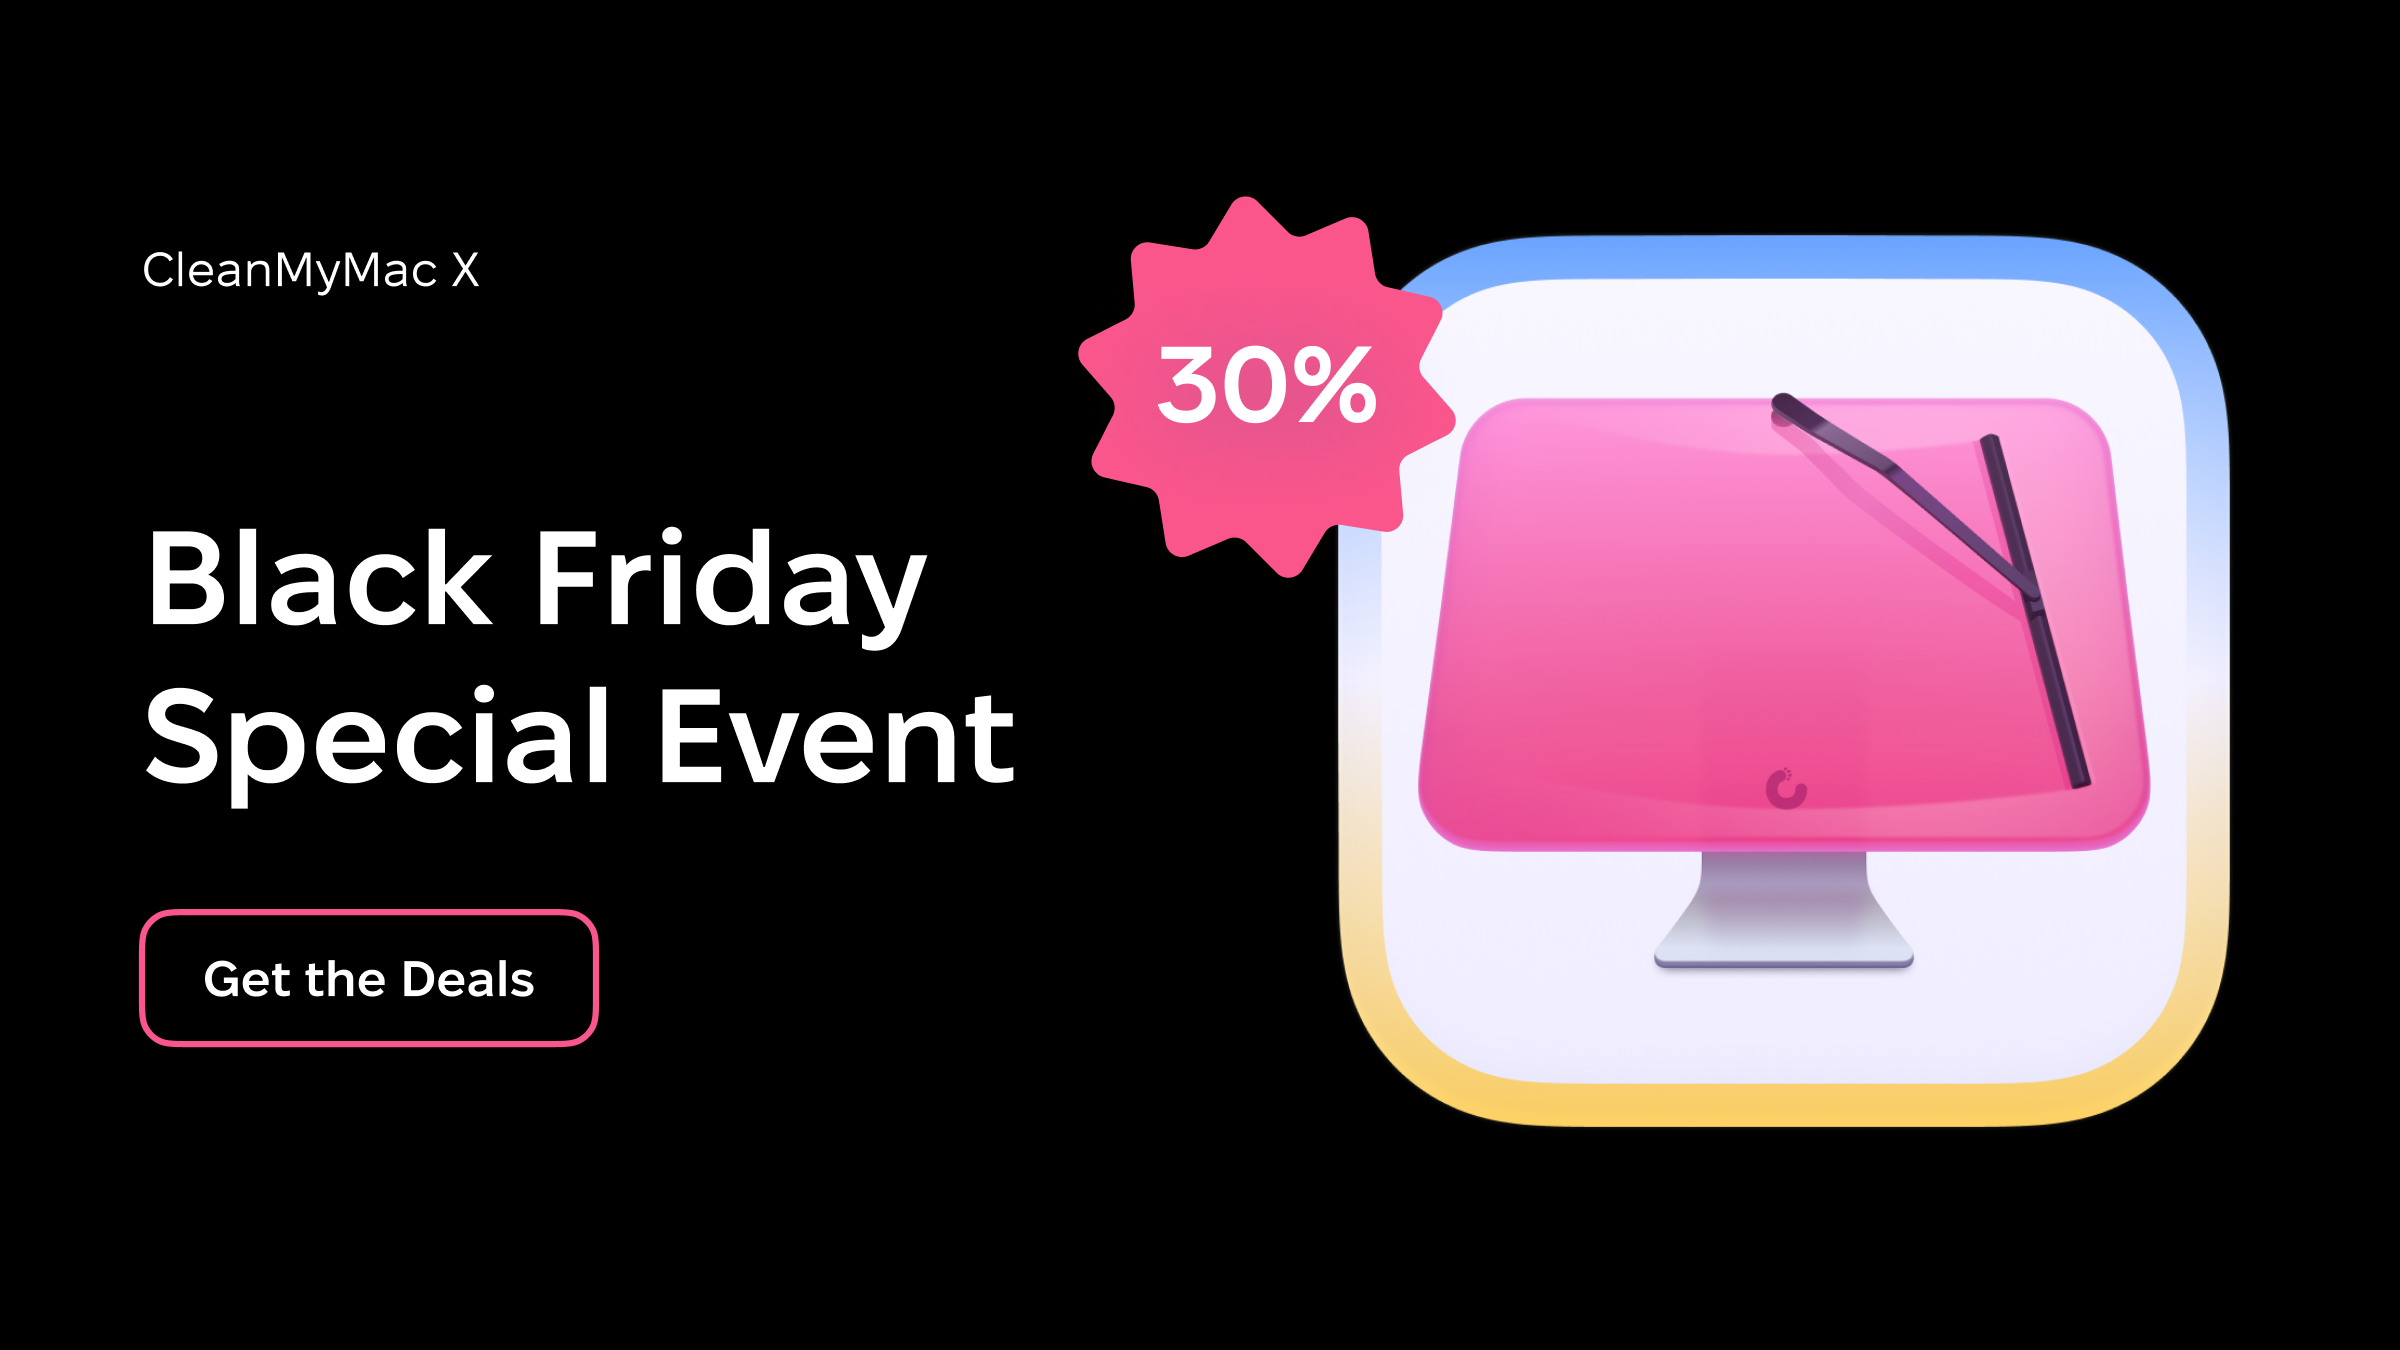 Save 30% on CleanMyMac X for Black Friday